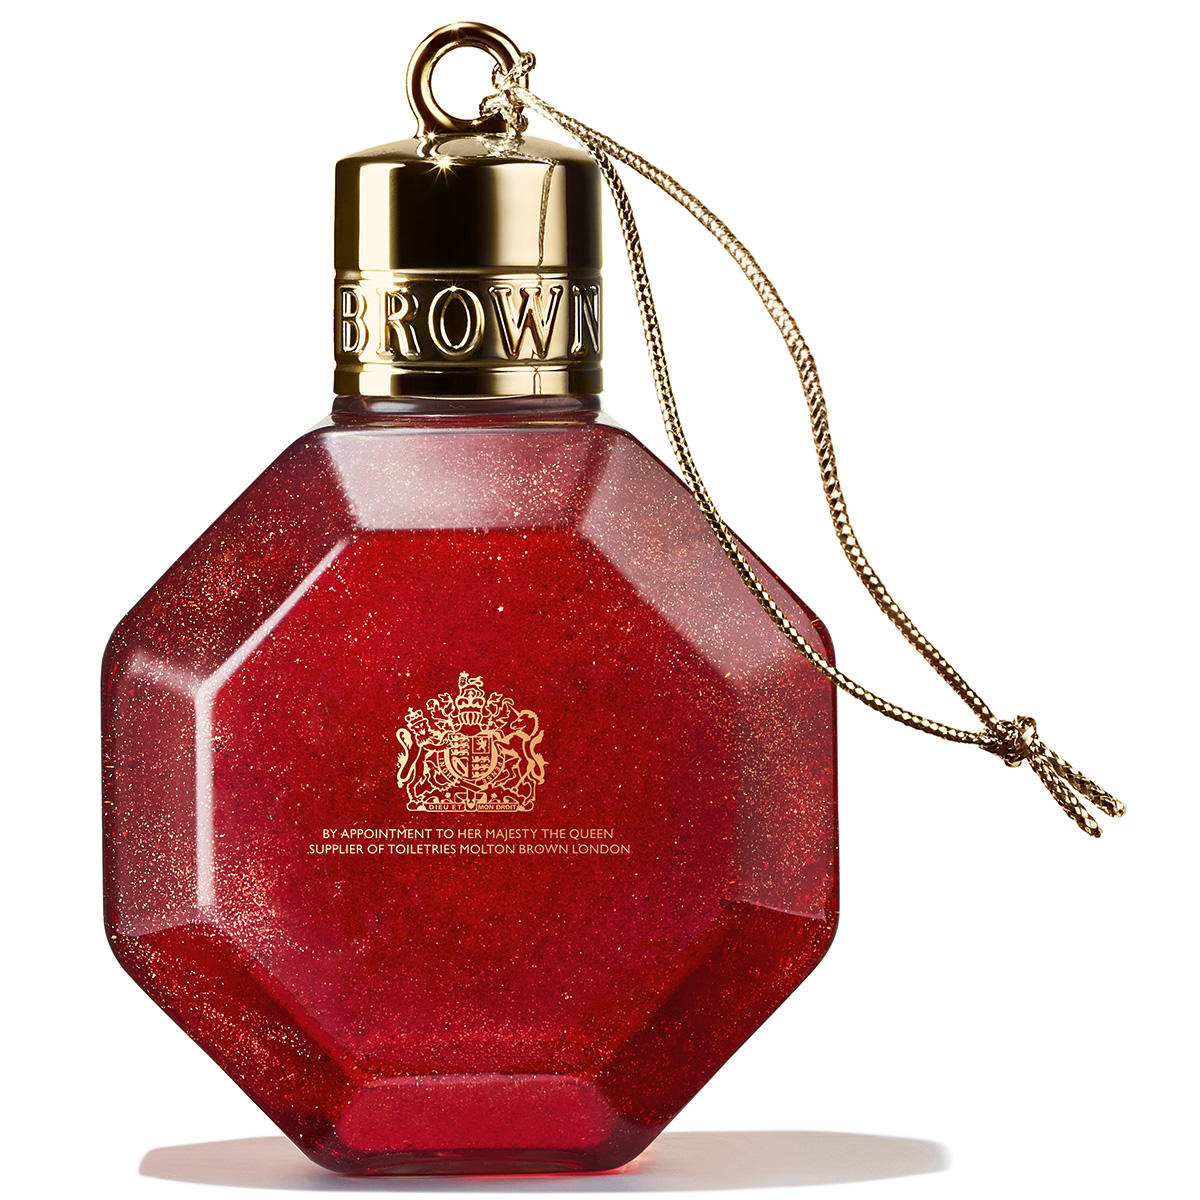 MOLTON BROWN Merry Berries & Mimosa Festive Bauble 75 ml - 3